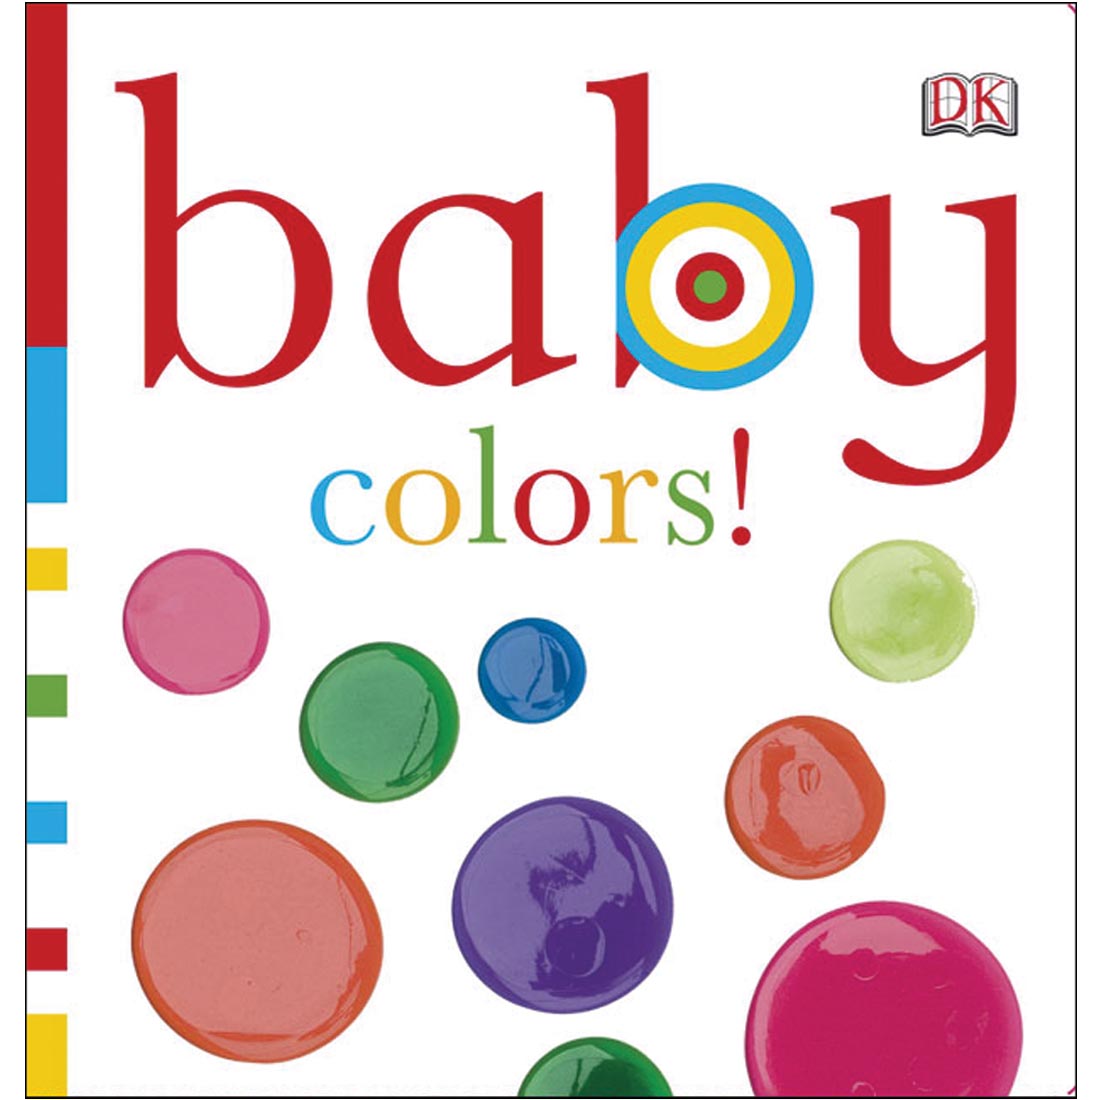 Baby Colors! Board Book by DK